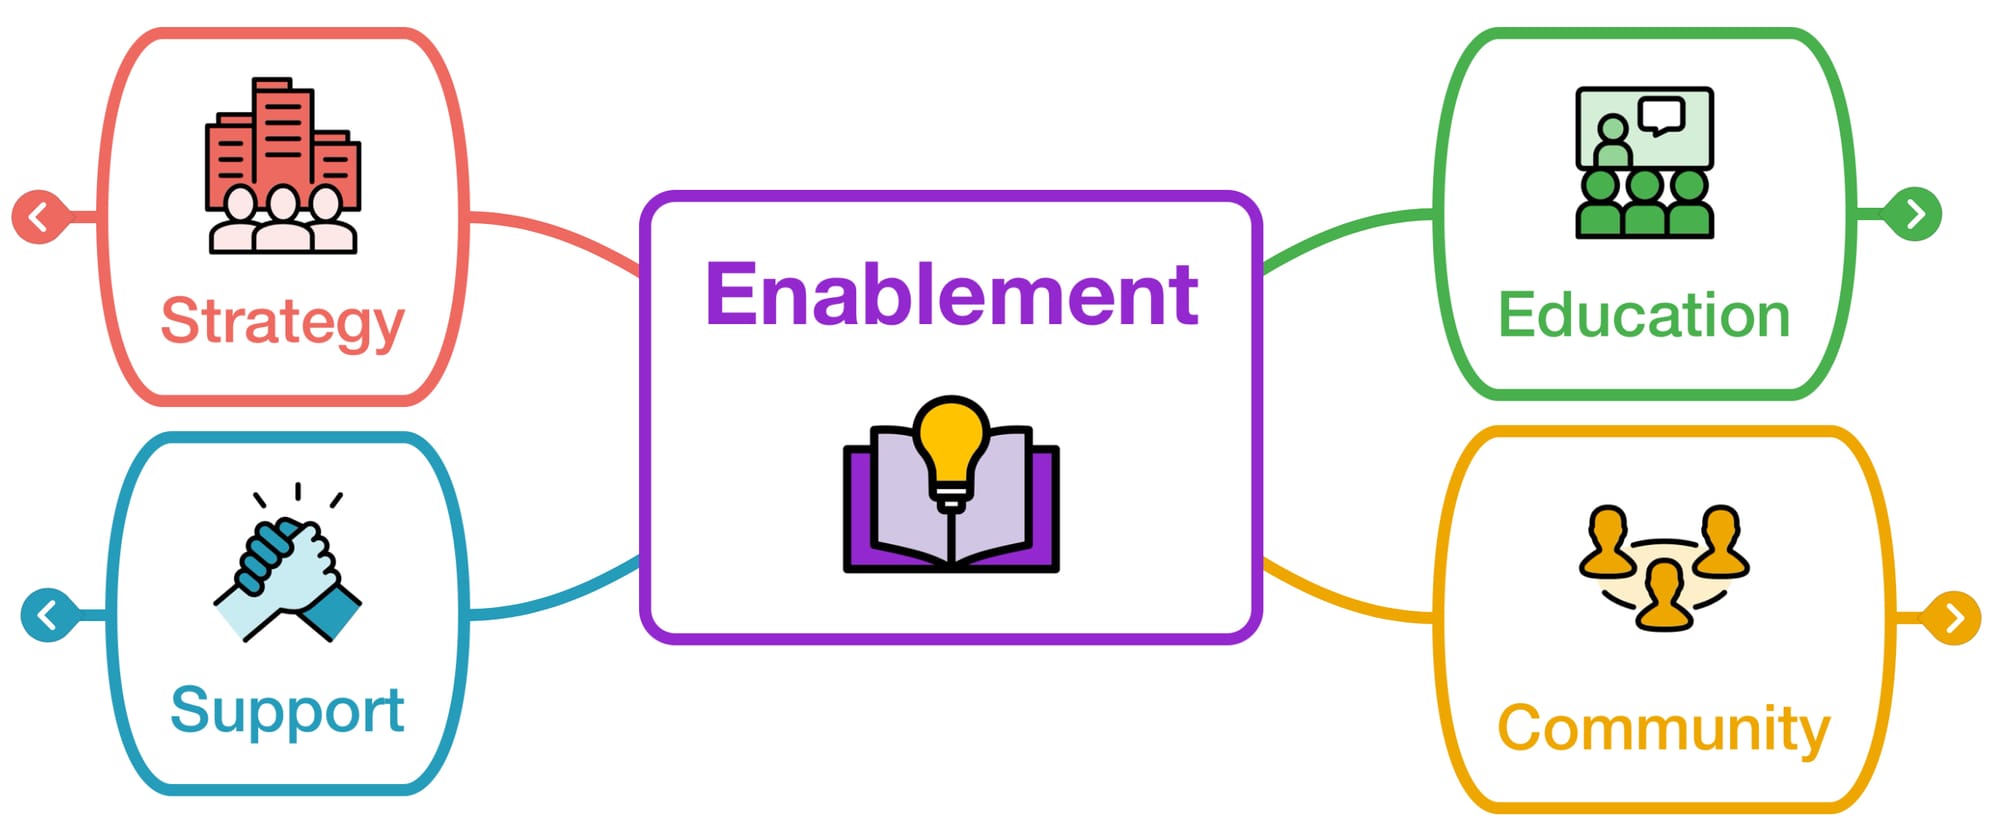 A mind map showing the four cornerstones of Enablement, namely Strategy, Education, Community, and Support.